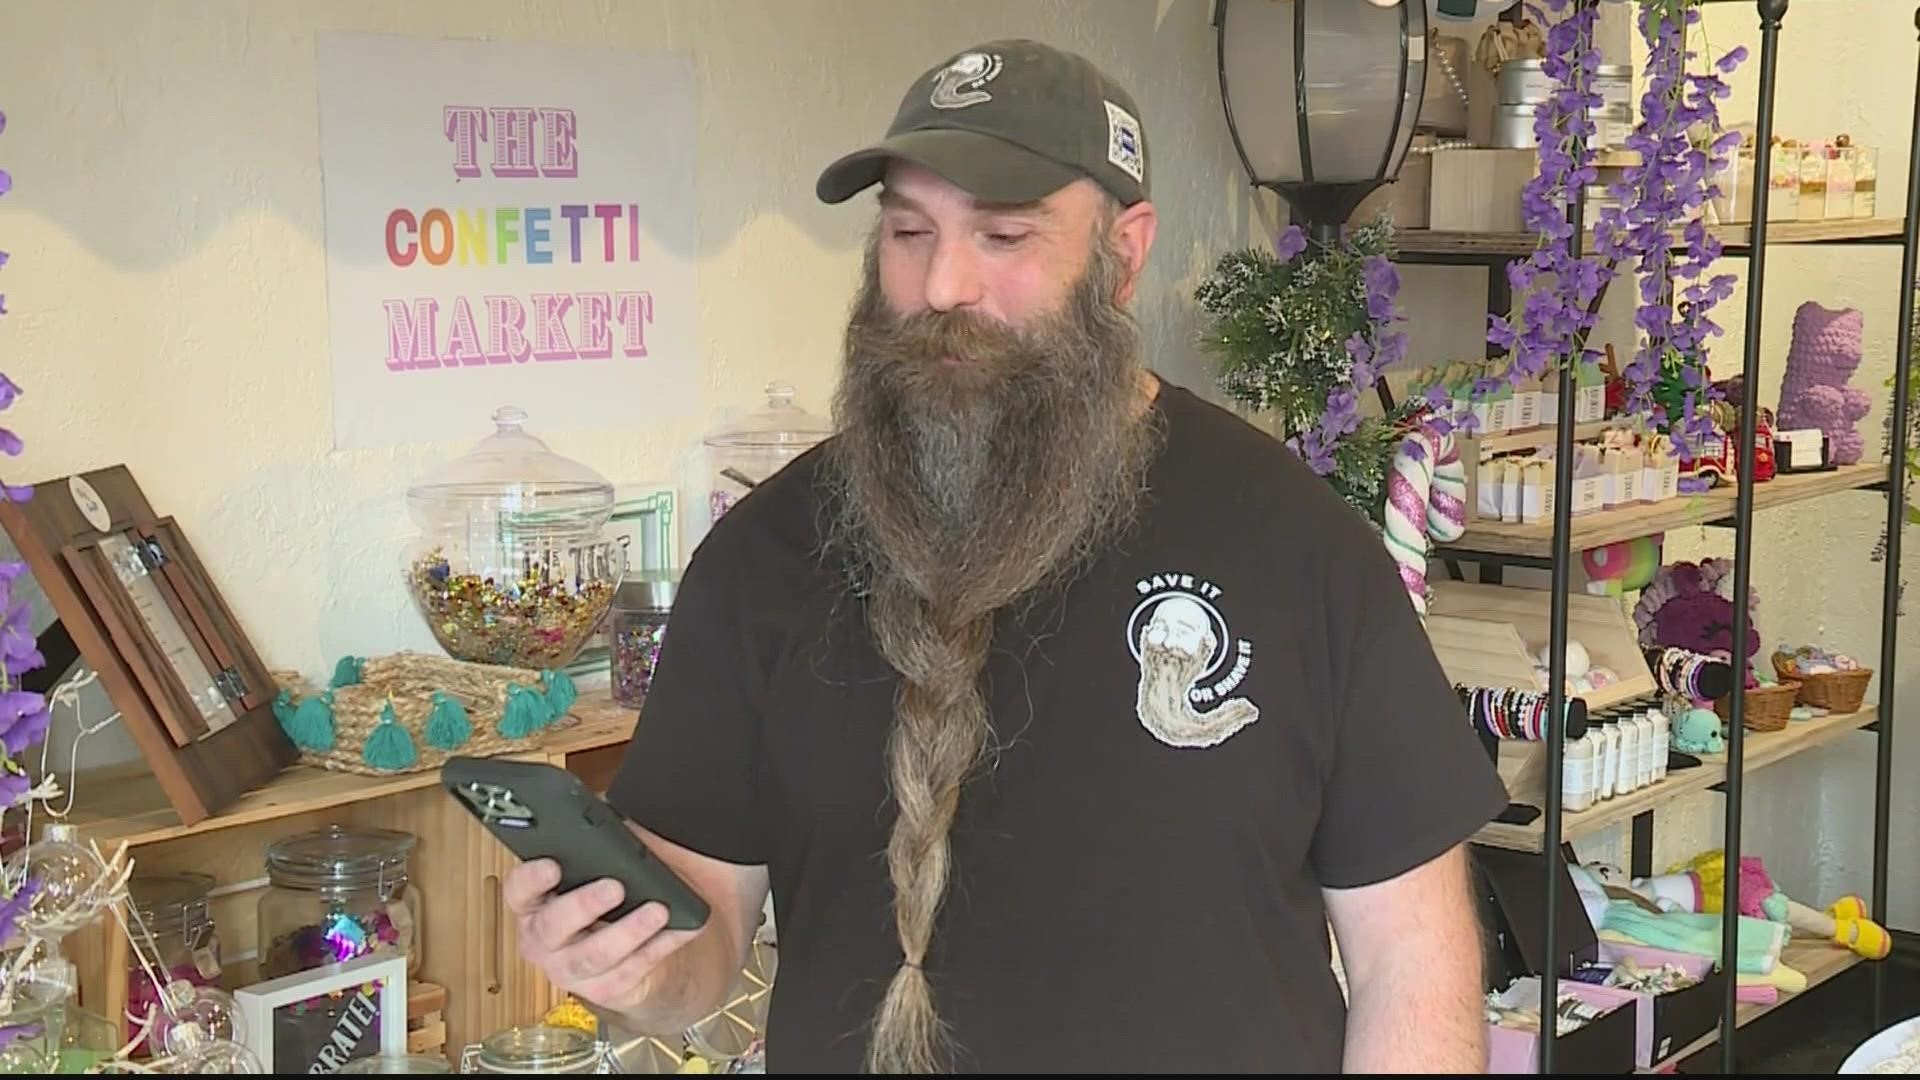 Brian Thompson has been growing out his beard for five years to raise money for charity.